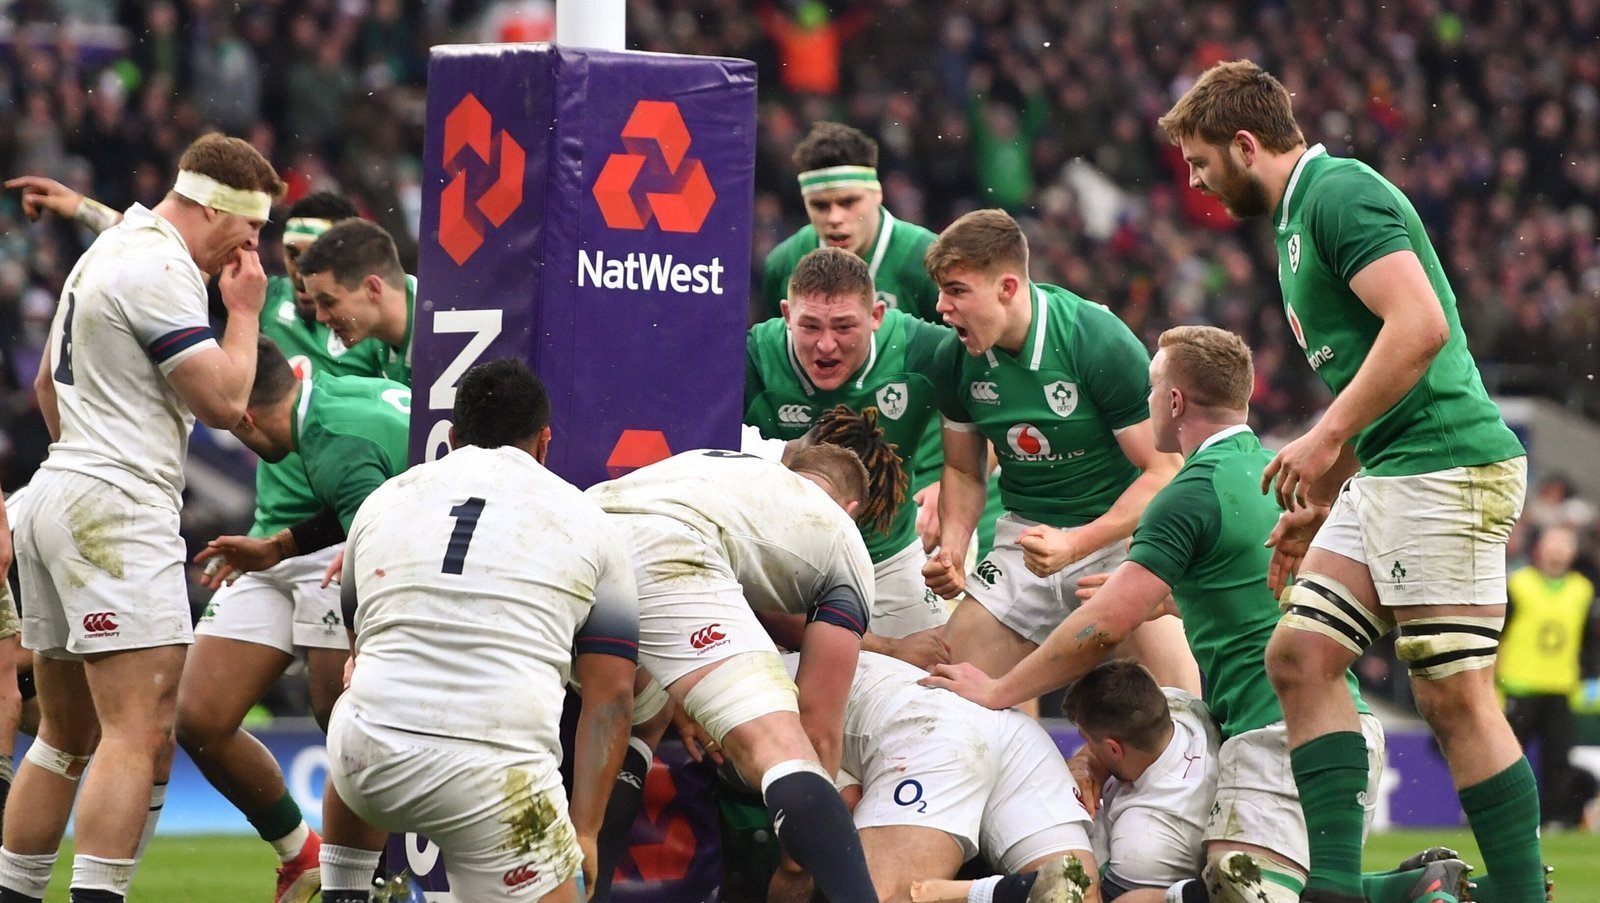 A classic among England Ireland rugby classics

